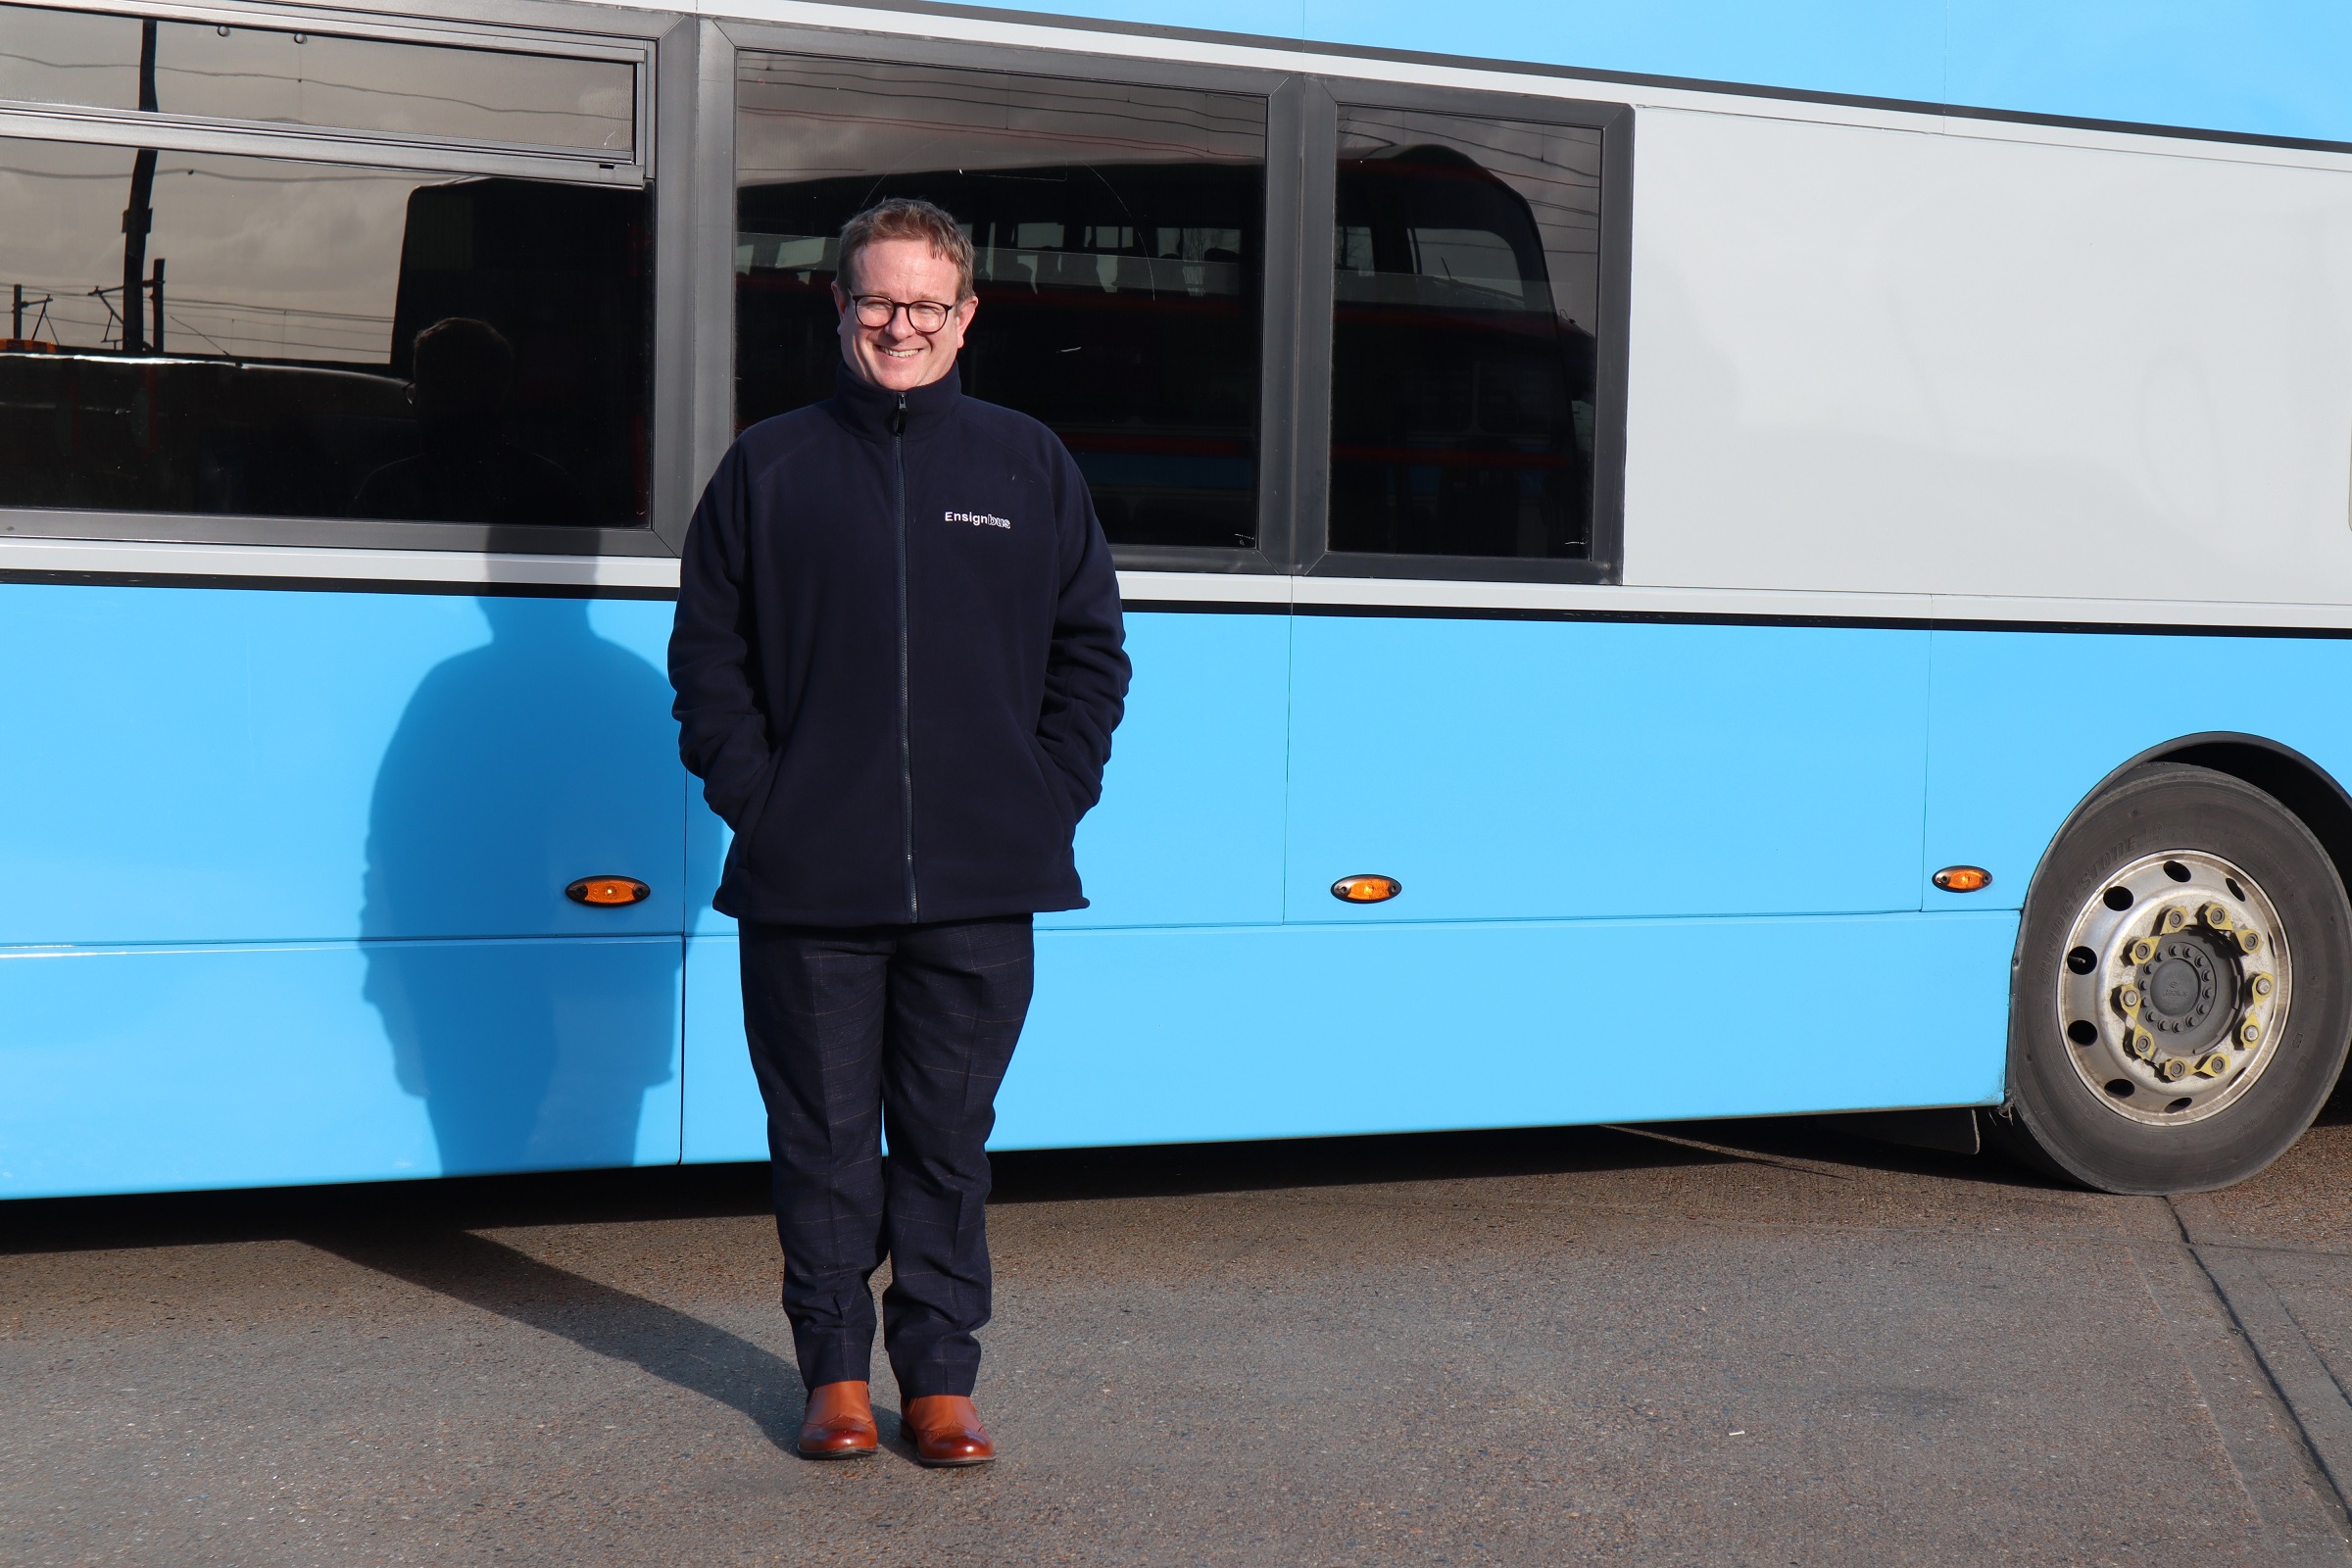 Ensignbus looks to strong future under FirstGroup ownership